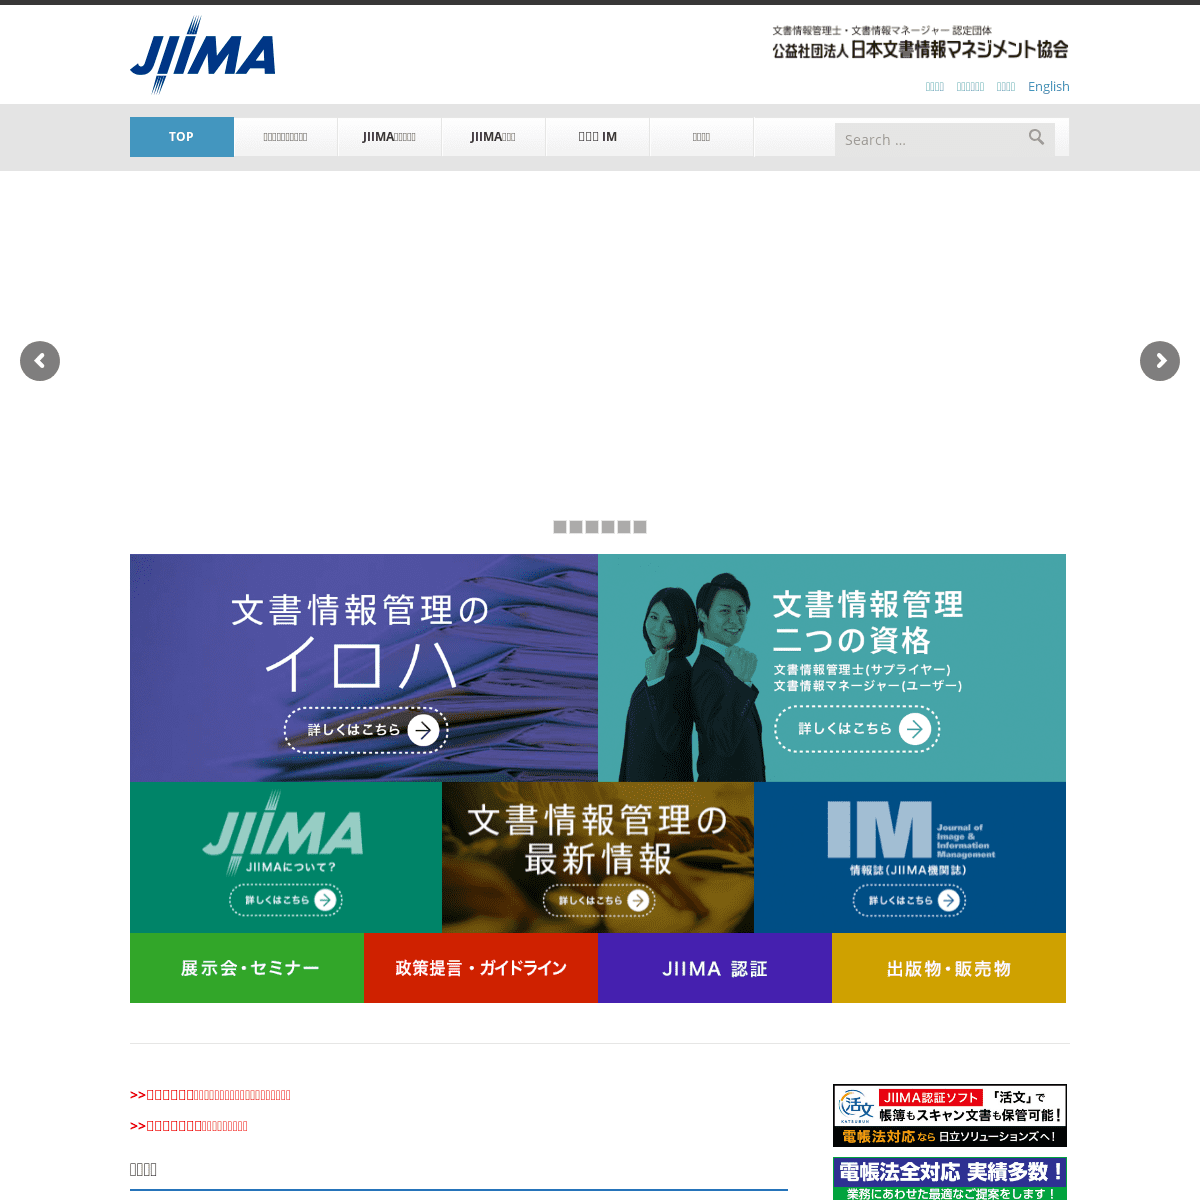 A complete backup of https://jiima.or.jp